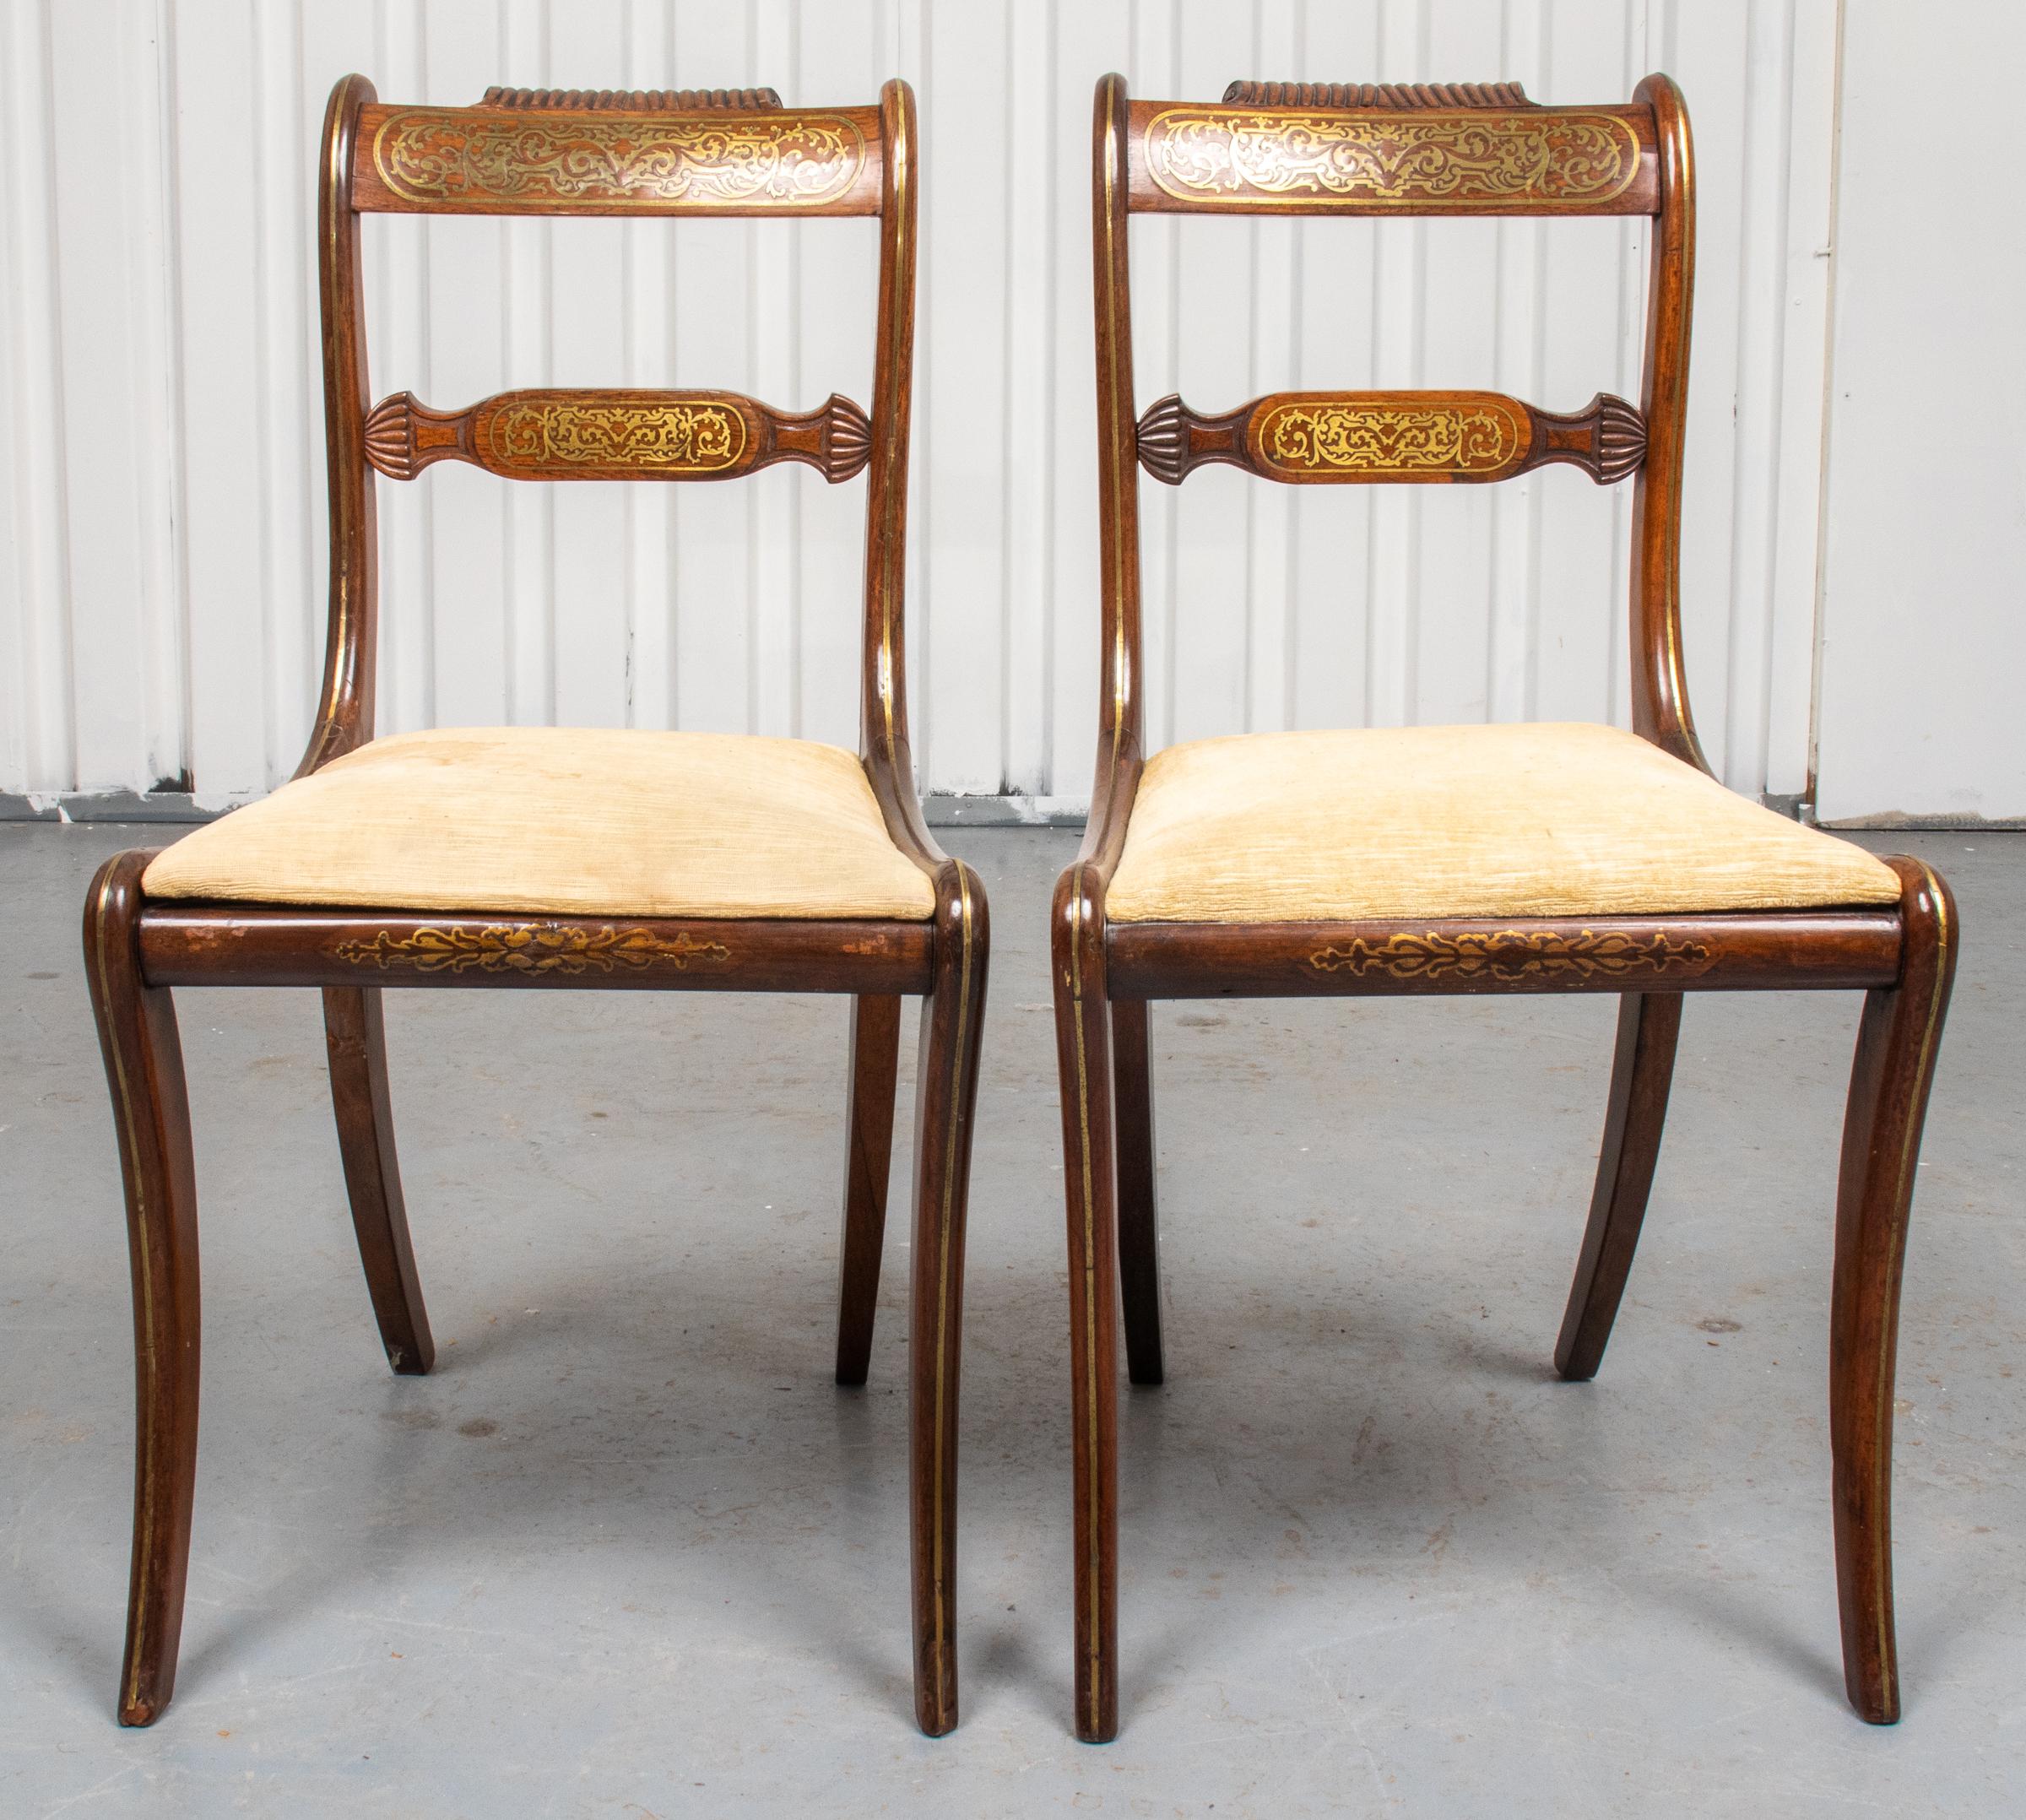 Pair of Regency brass inlaid side chairs, early 19th century, the carved crest rail above brass inlaid panels, the seat raised above curved saber legs. Measures: 33.25” H x 18” W x 21” D.